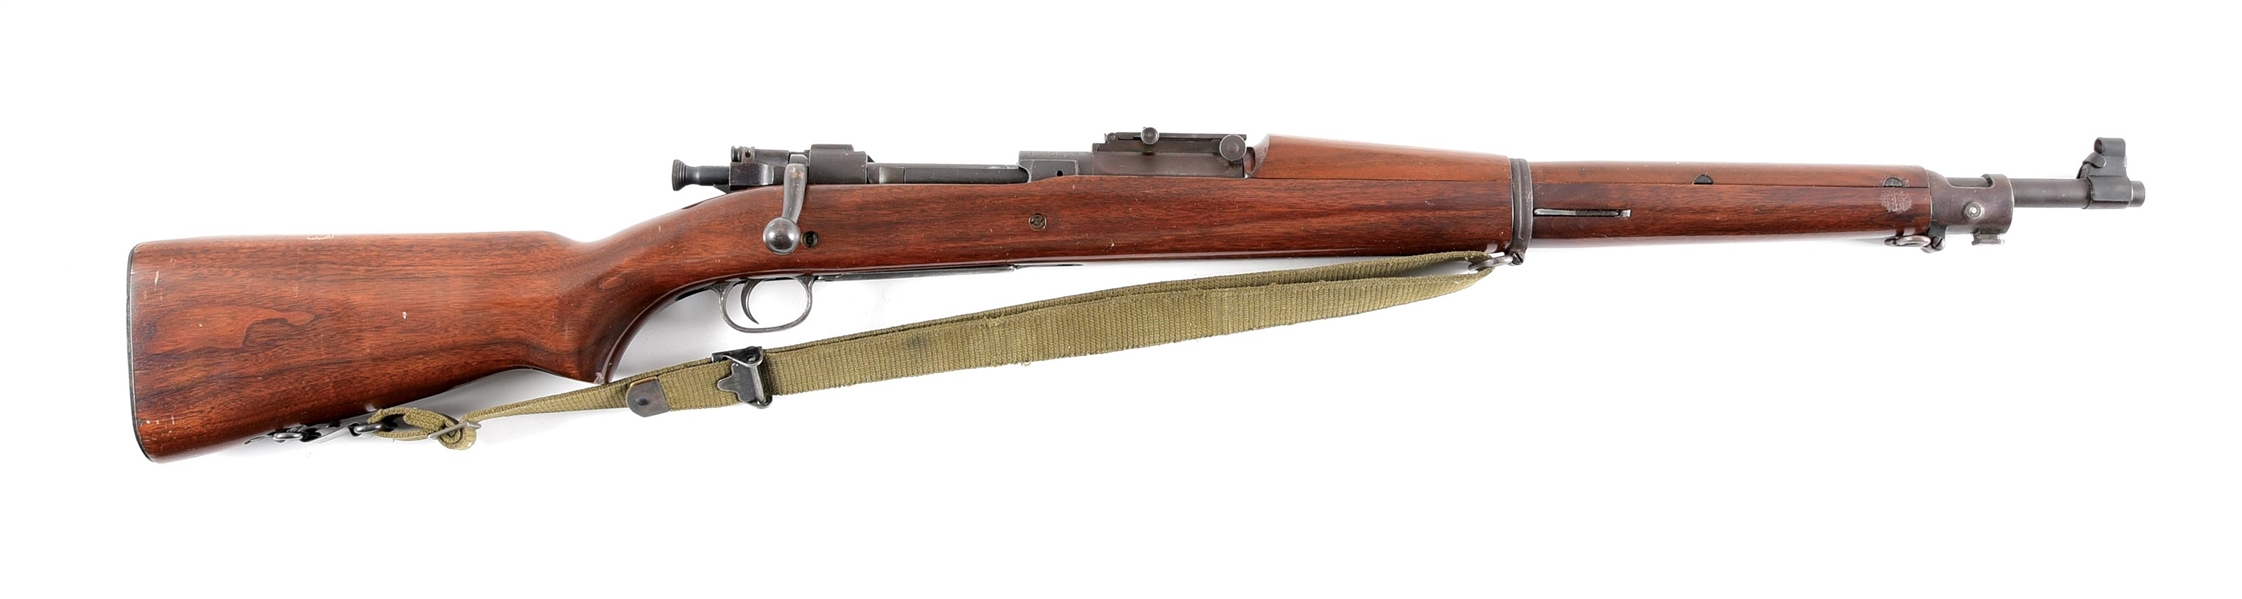 (C) SPRINGFIELD MODEL 1903-A1 BOLT ACTION RIFLE.